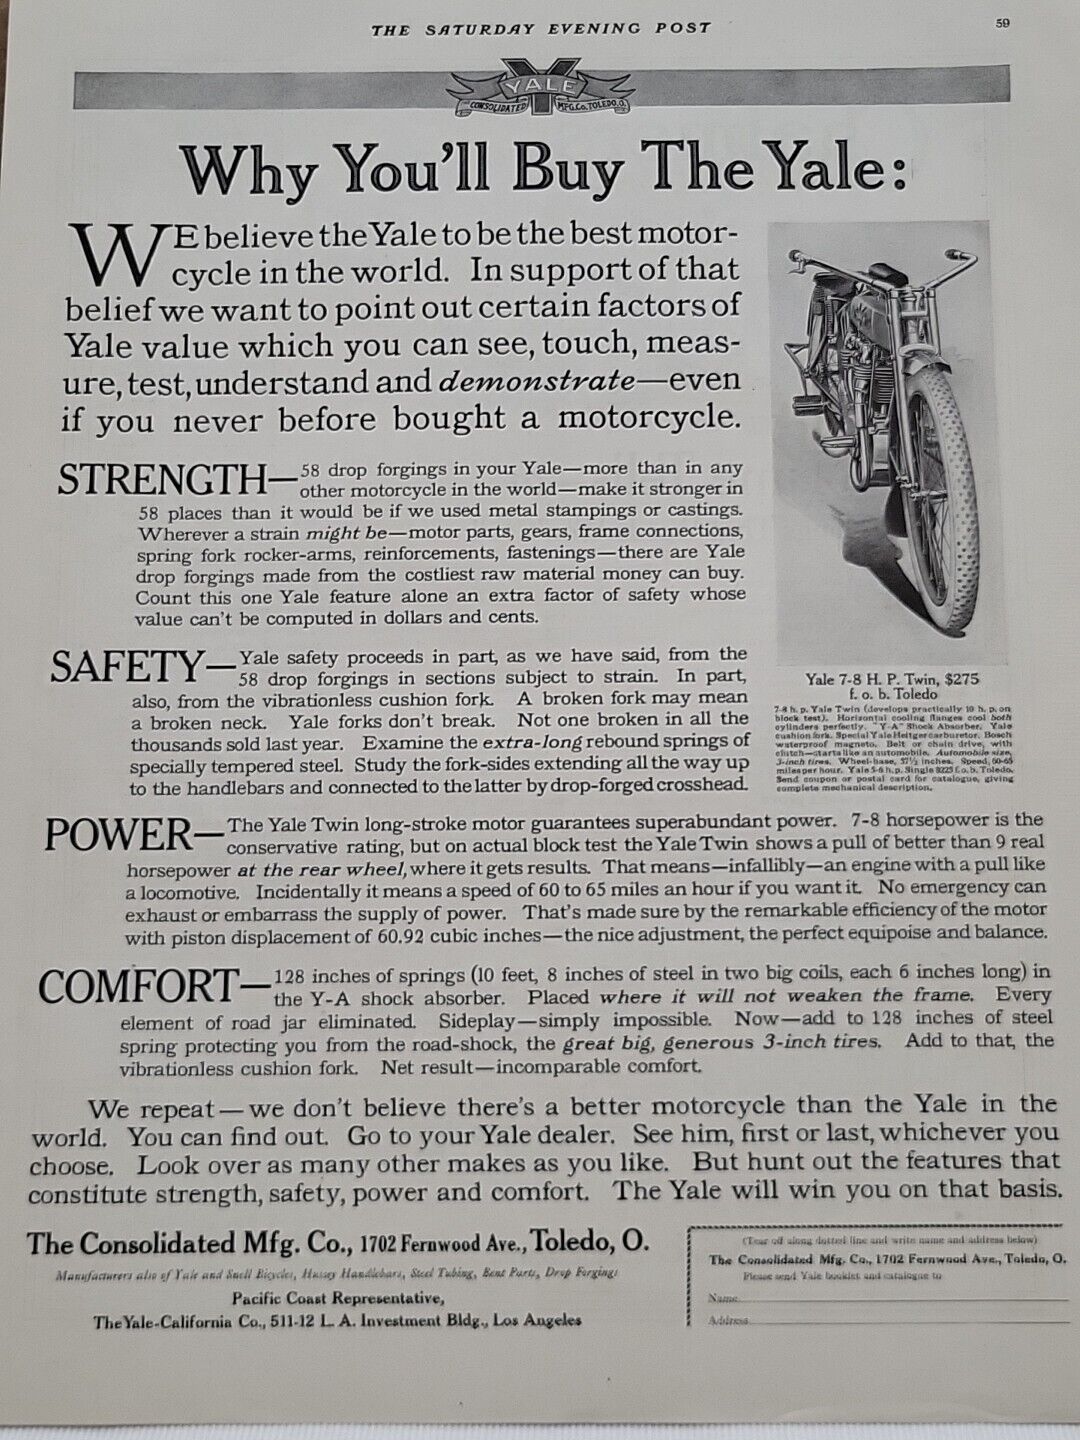 1913 Yale Motorcycle S. E. Post Print Ad Toledo Consolidated Mfg. 7-8 H. P. Twin